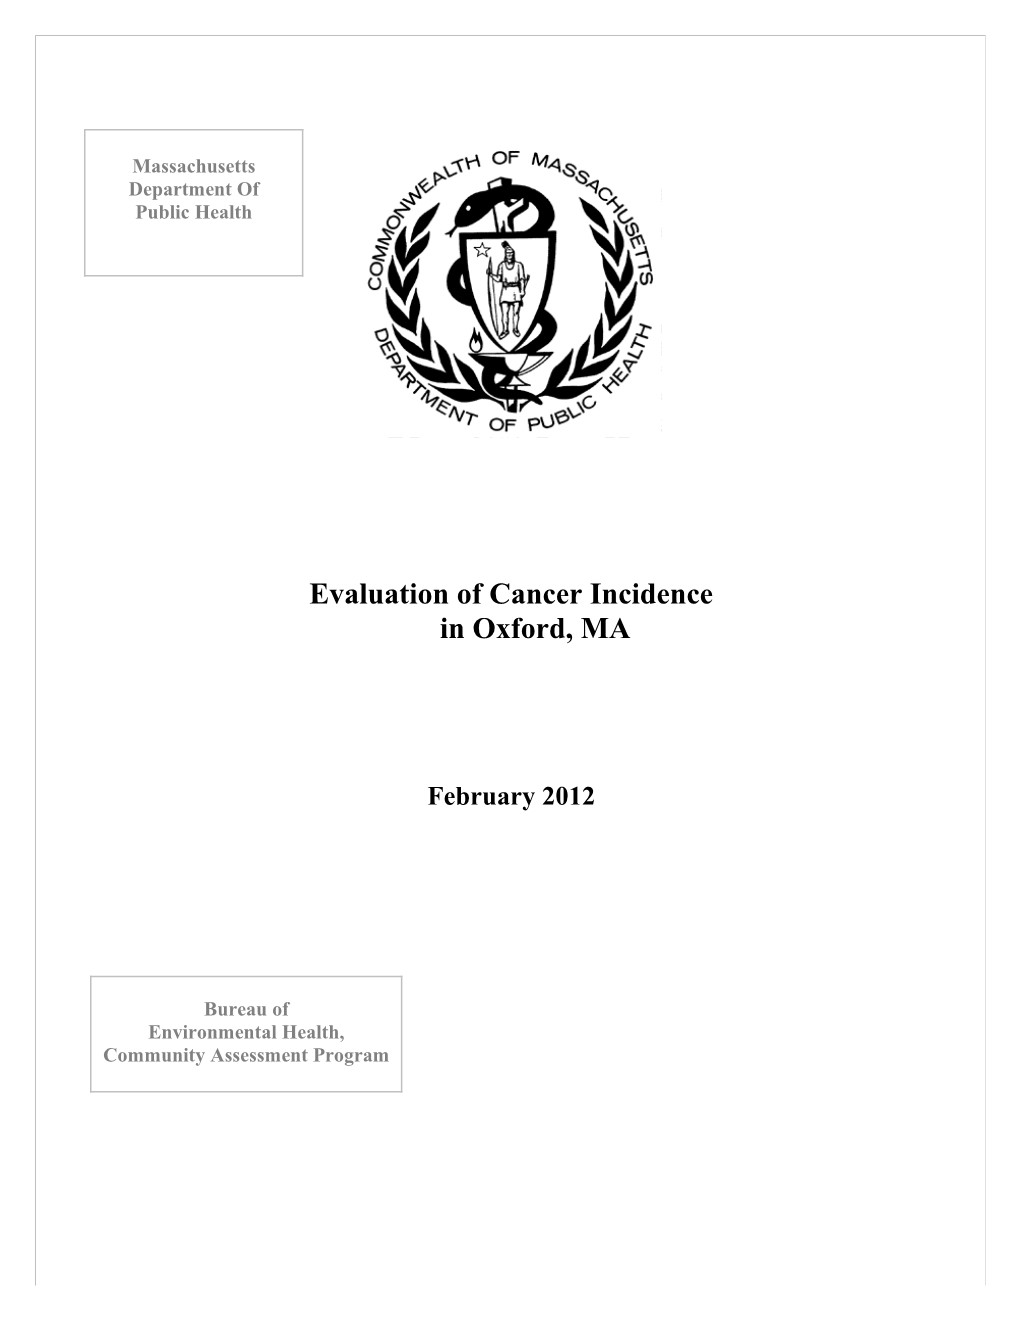 Evaluation of Cancer Incidence in Oxford, MA - February 2012